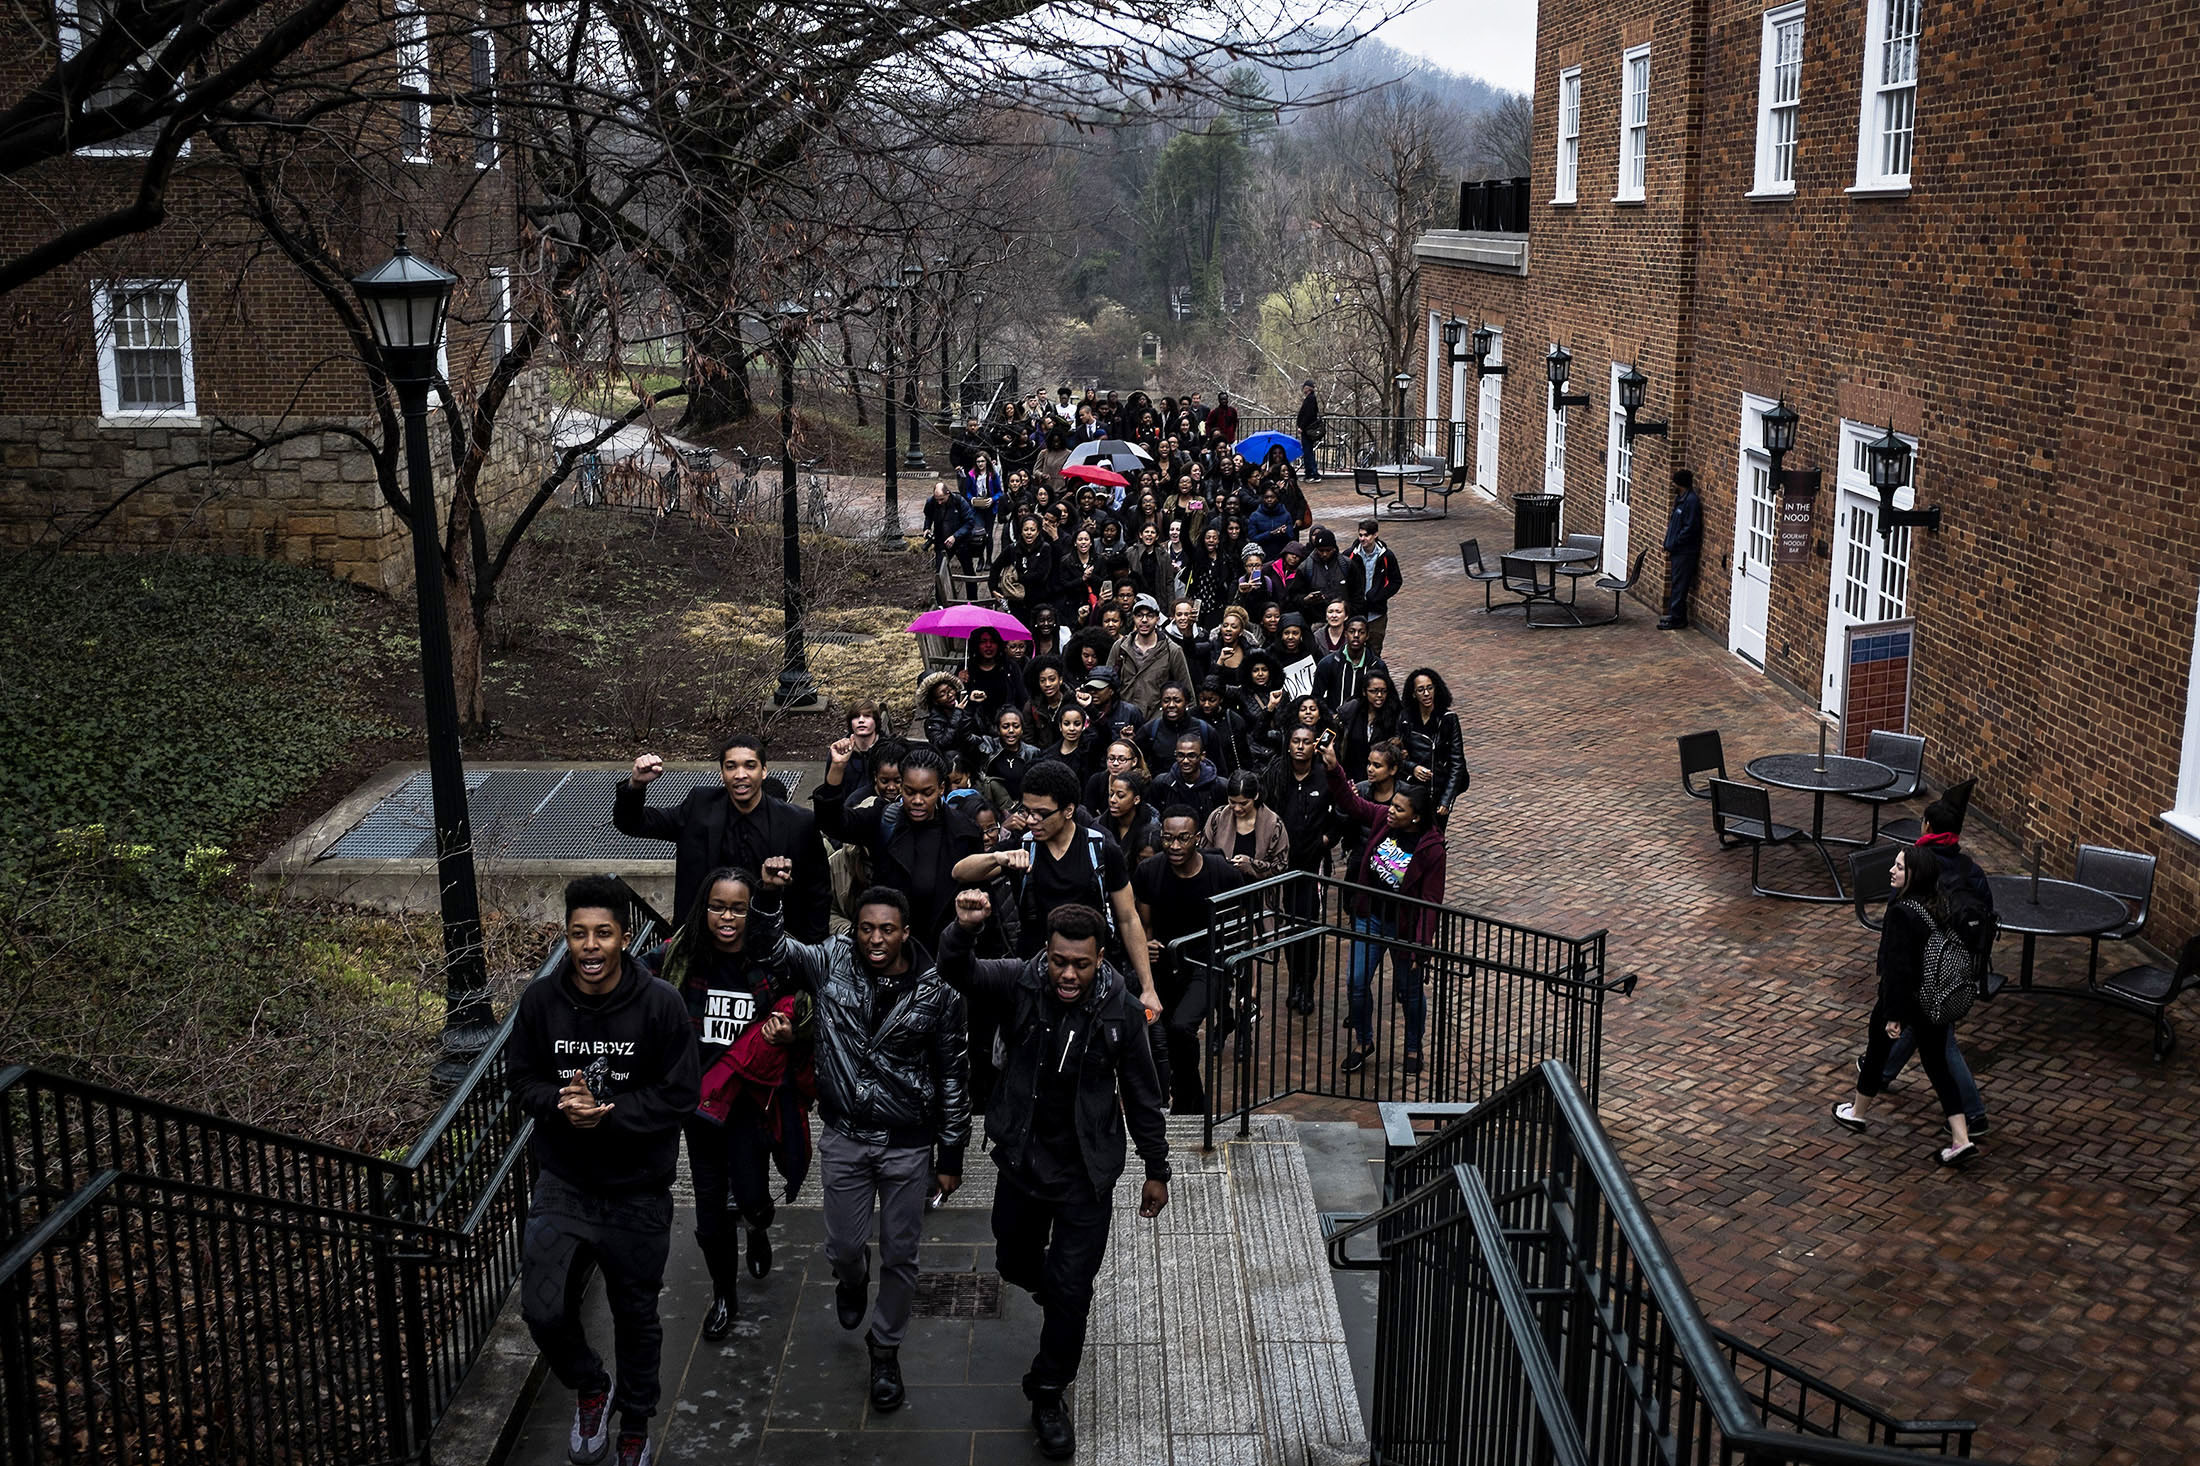 Students protest at the University of Virginia following the arrest by ABC police of student Martese Johnson outside a bar in Charlottesville, Va. on March 20, 2015. (Lawler Duggan/For The Washington Post—Getty Images))